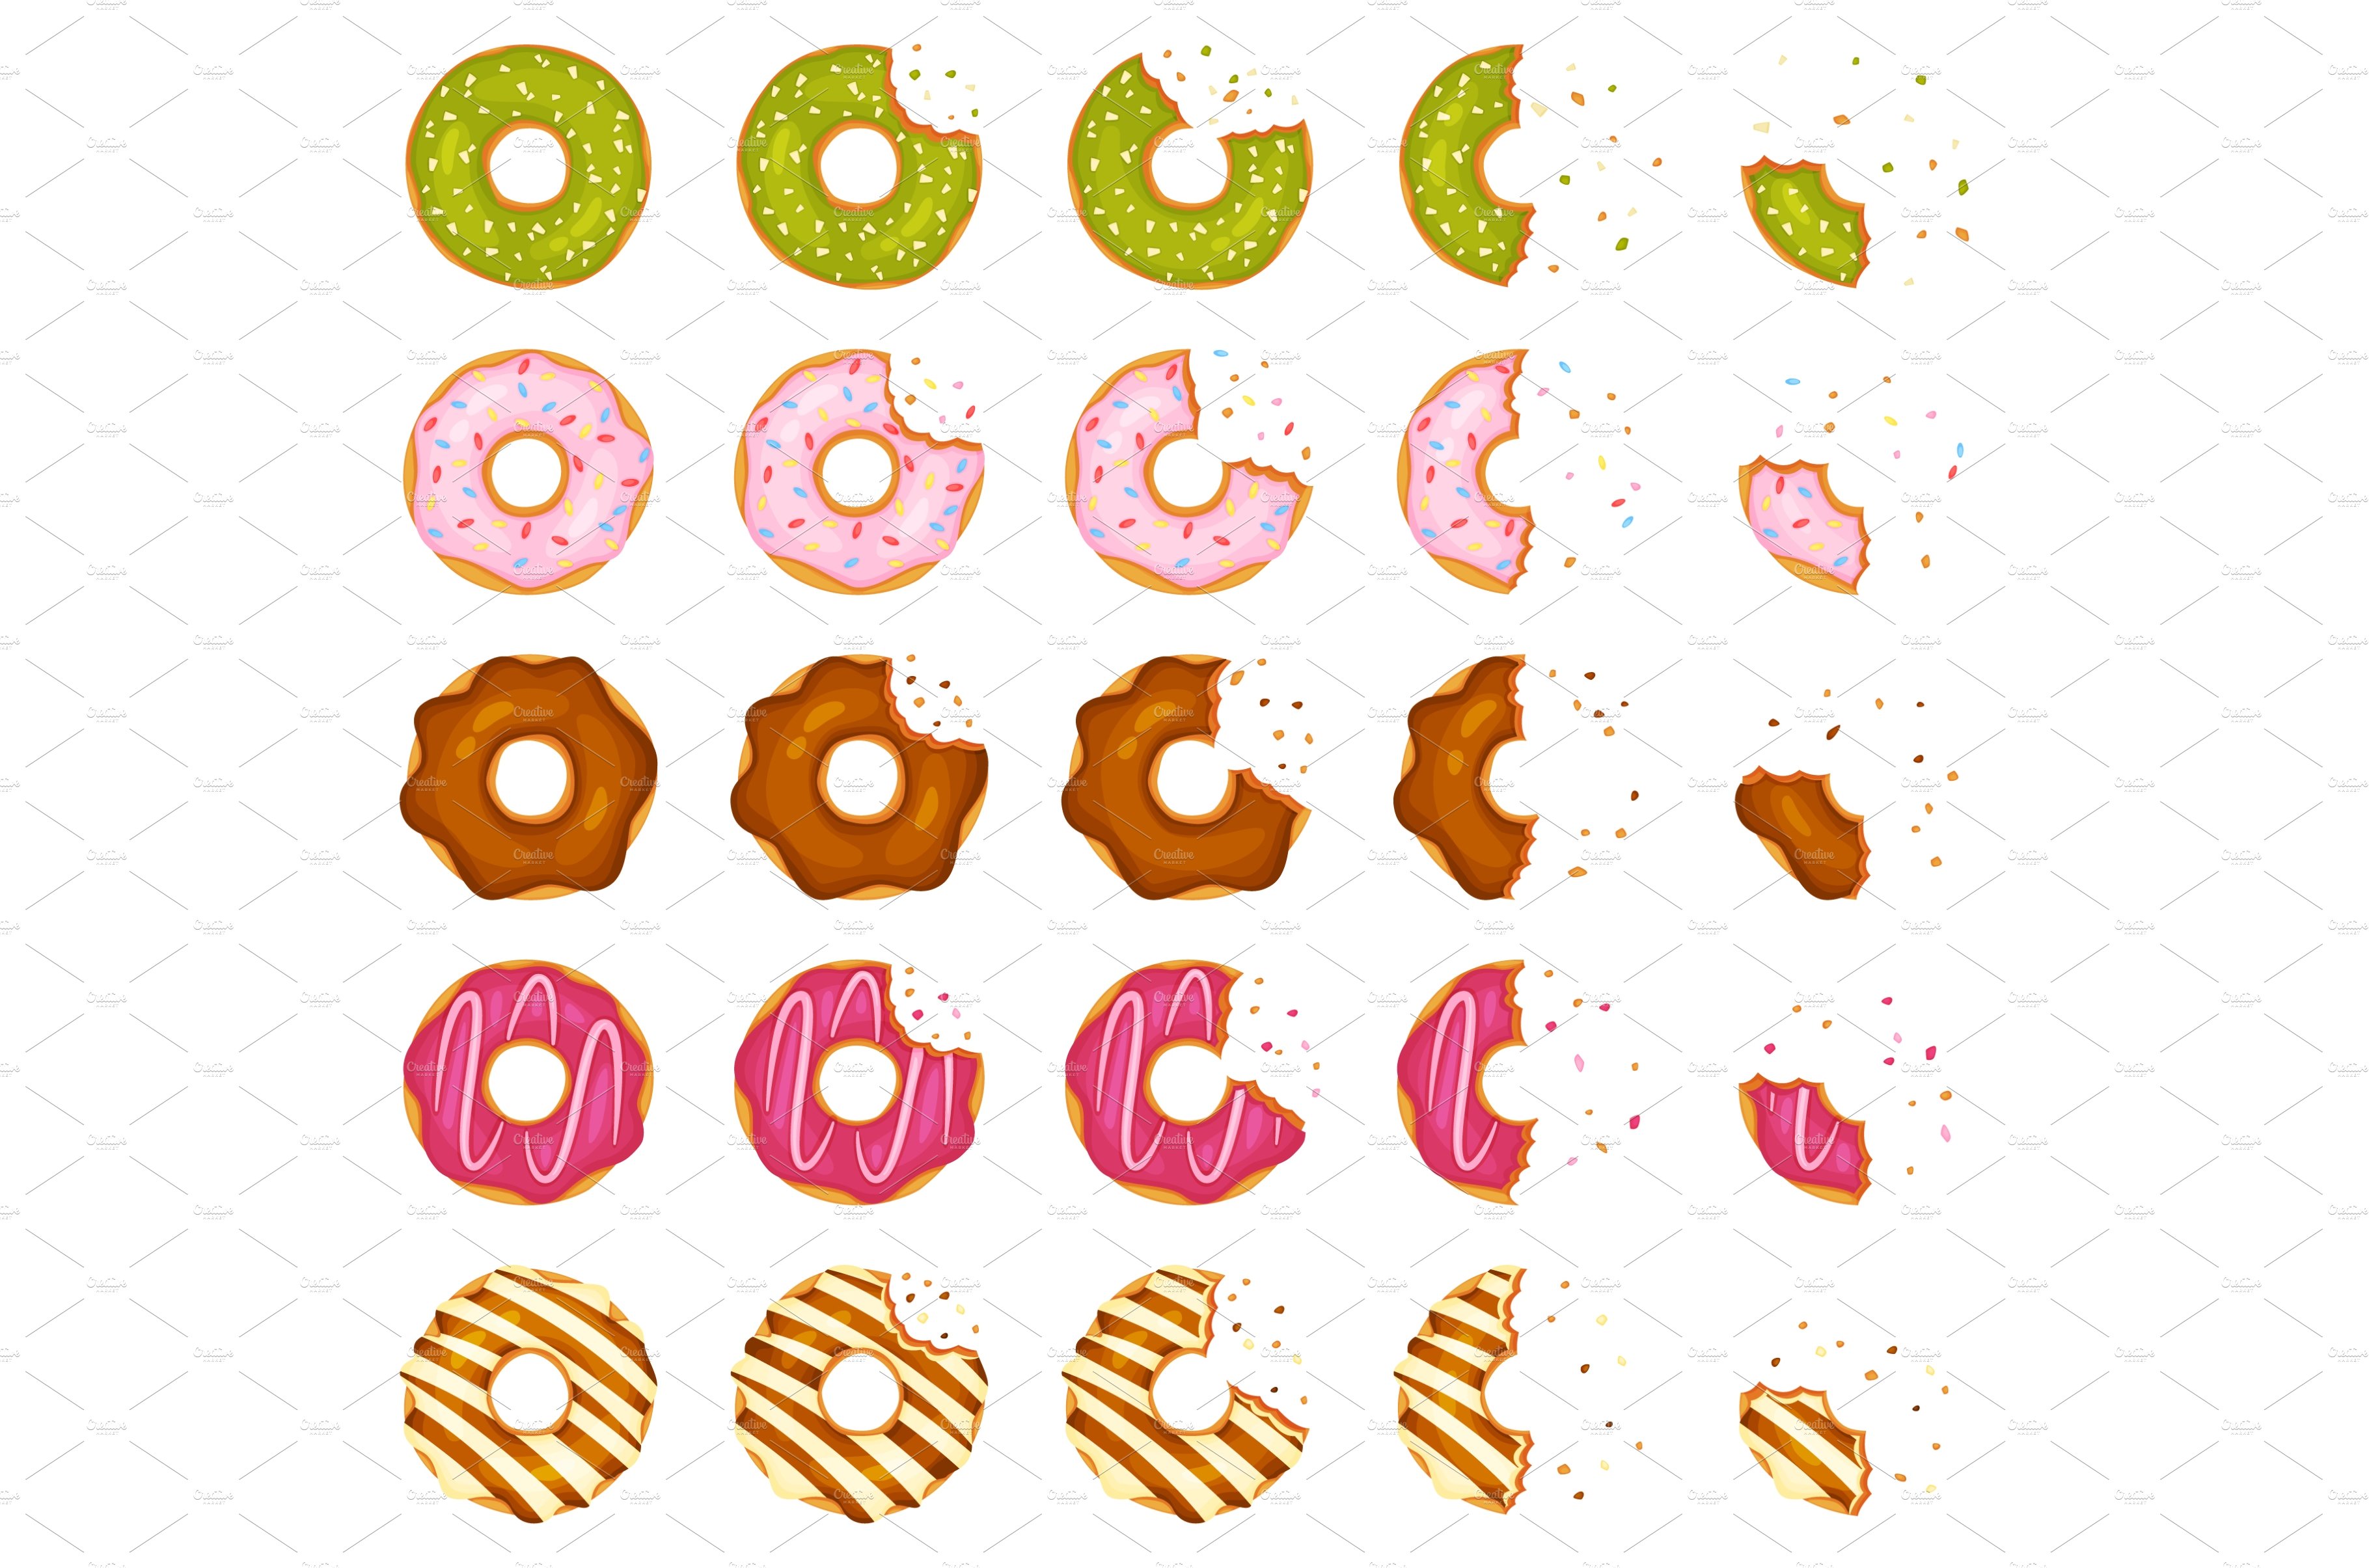 Bitten and half eaten donuts cover image.